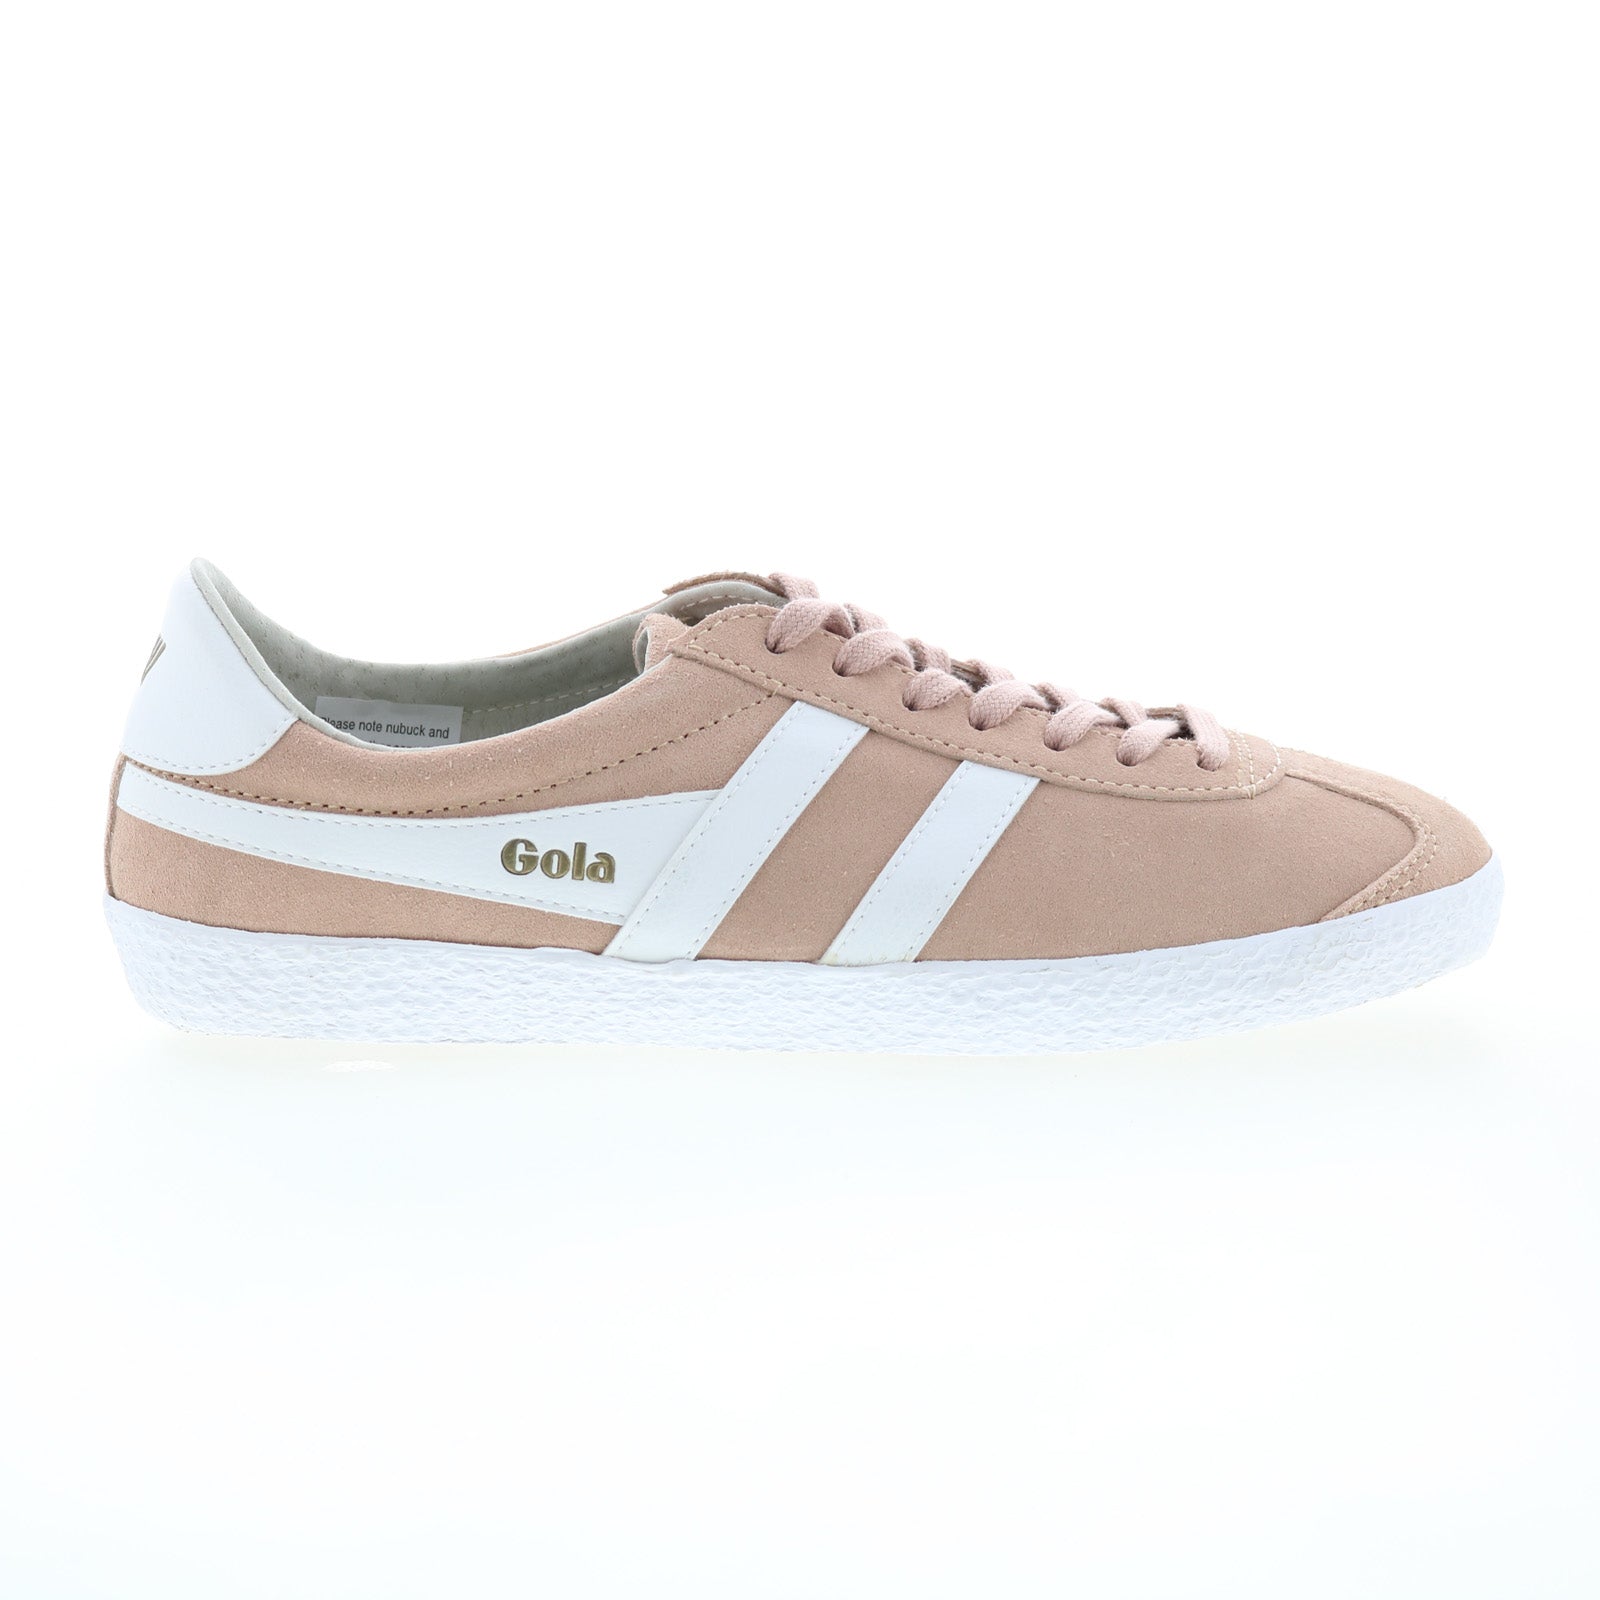 Gola Specialist CLA145 Womens Pink Suede Lace Up Lifestyle Sneakers Shoes